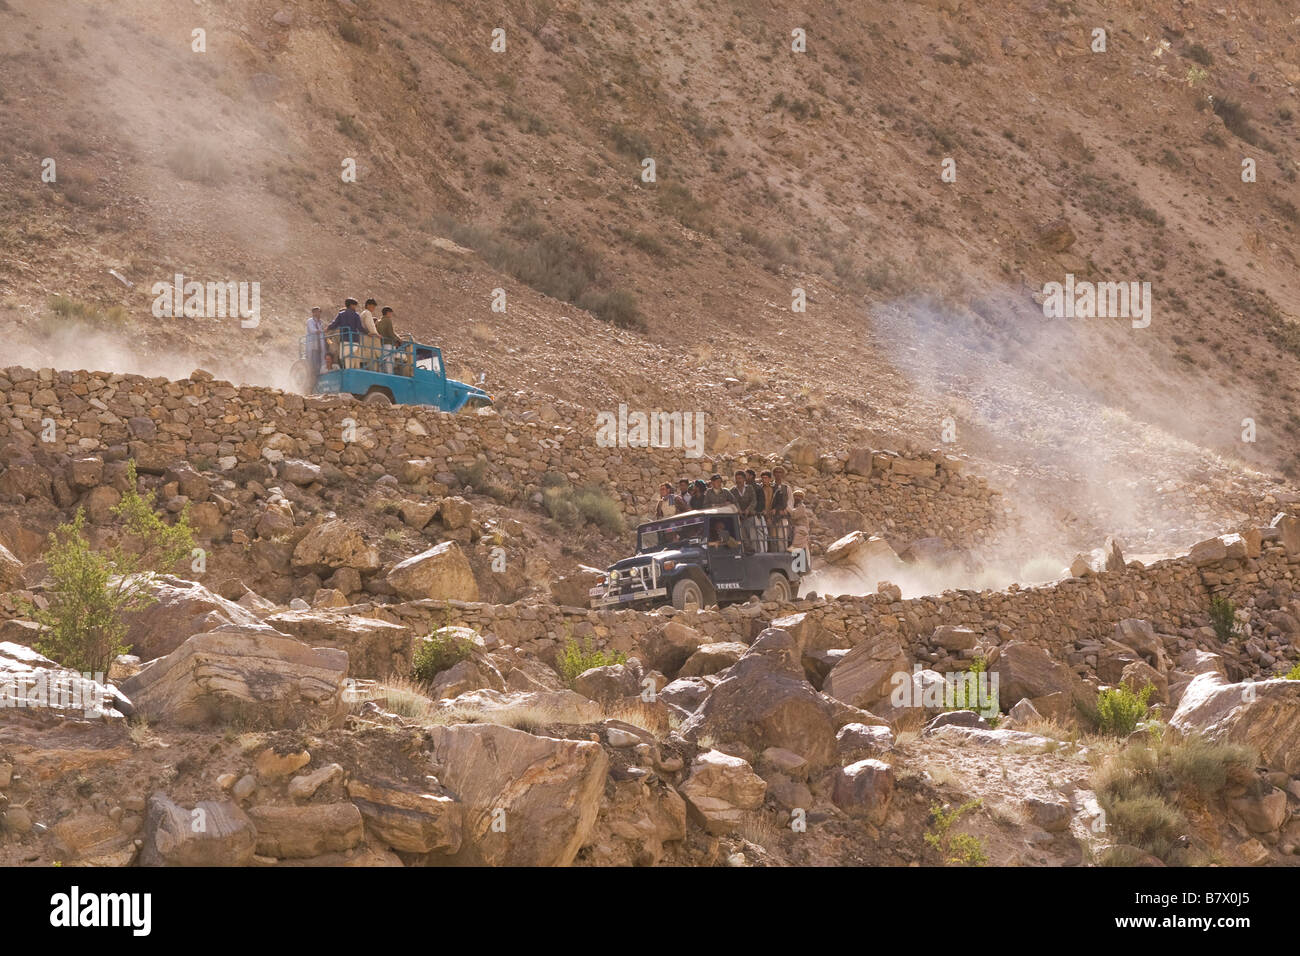 Balti porters riding in jeeps on the dusty road to Askole in Baltistan in Pakistan Stock Photo